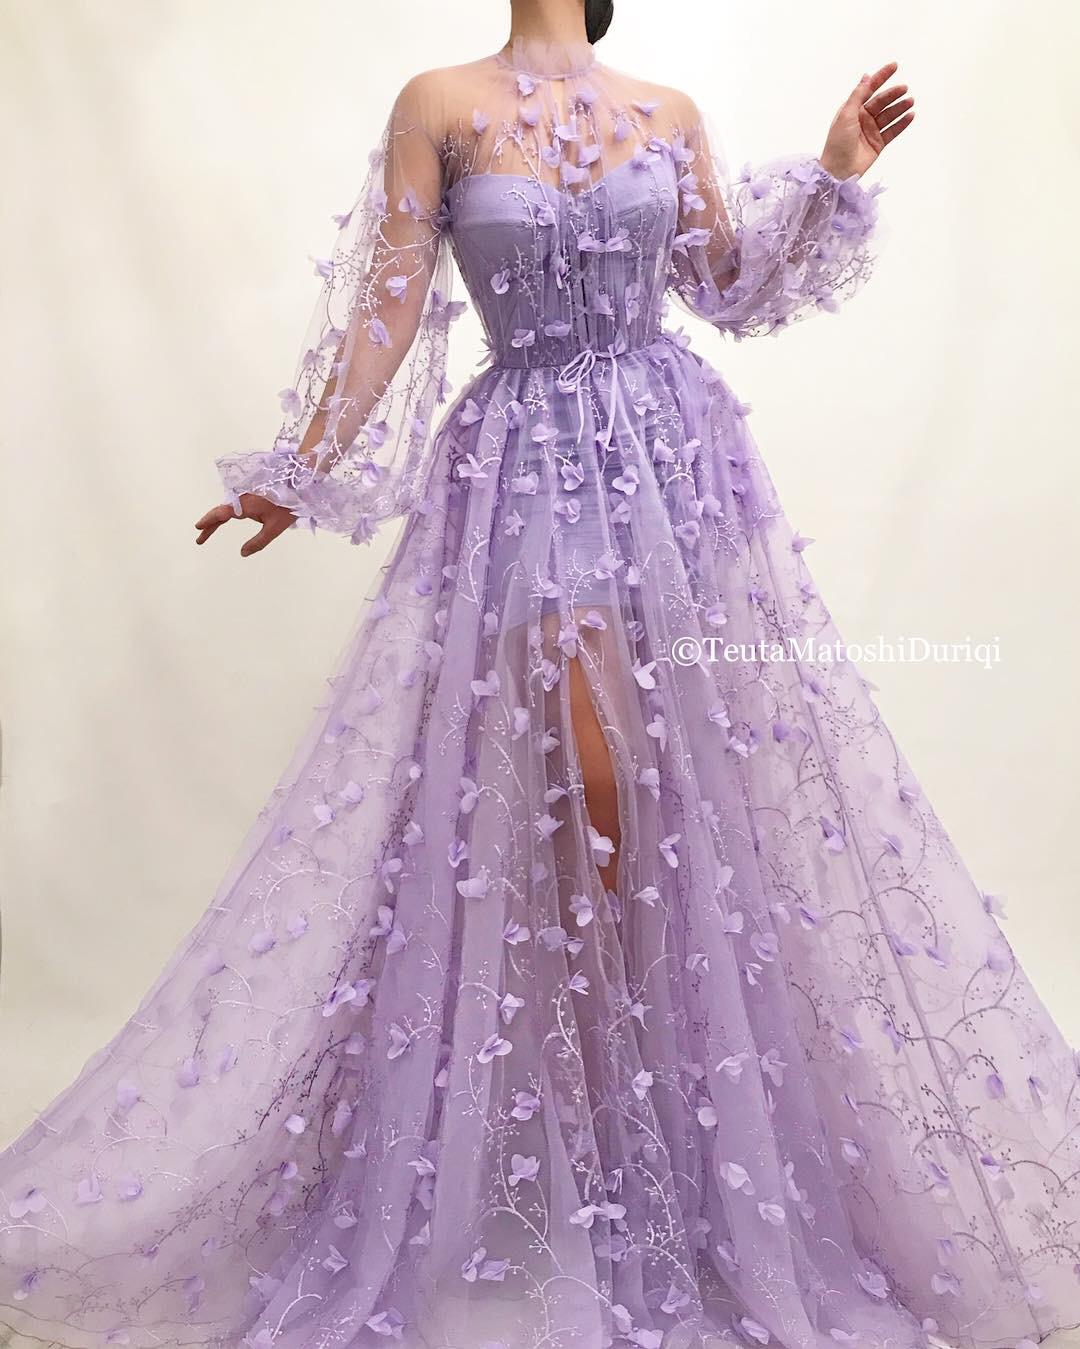 Purple A-Line dress with long sleeves, lace and embroidery